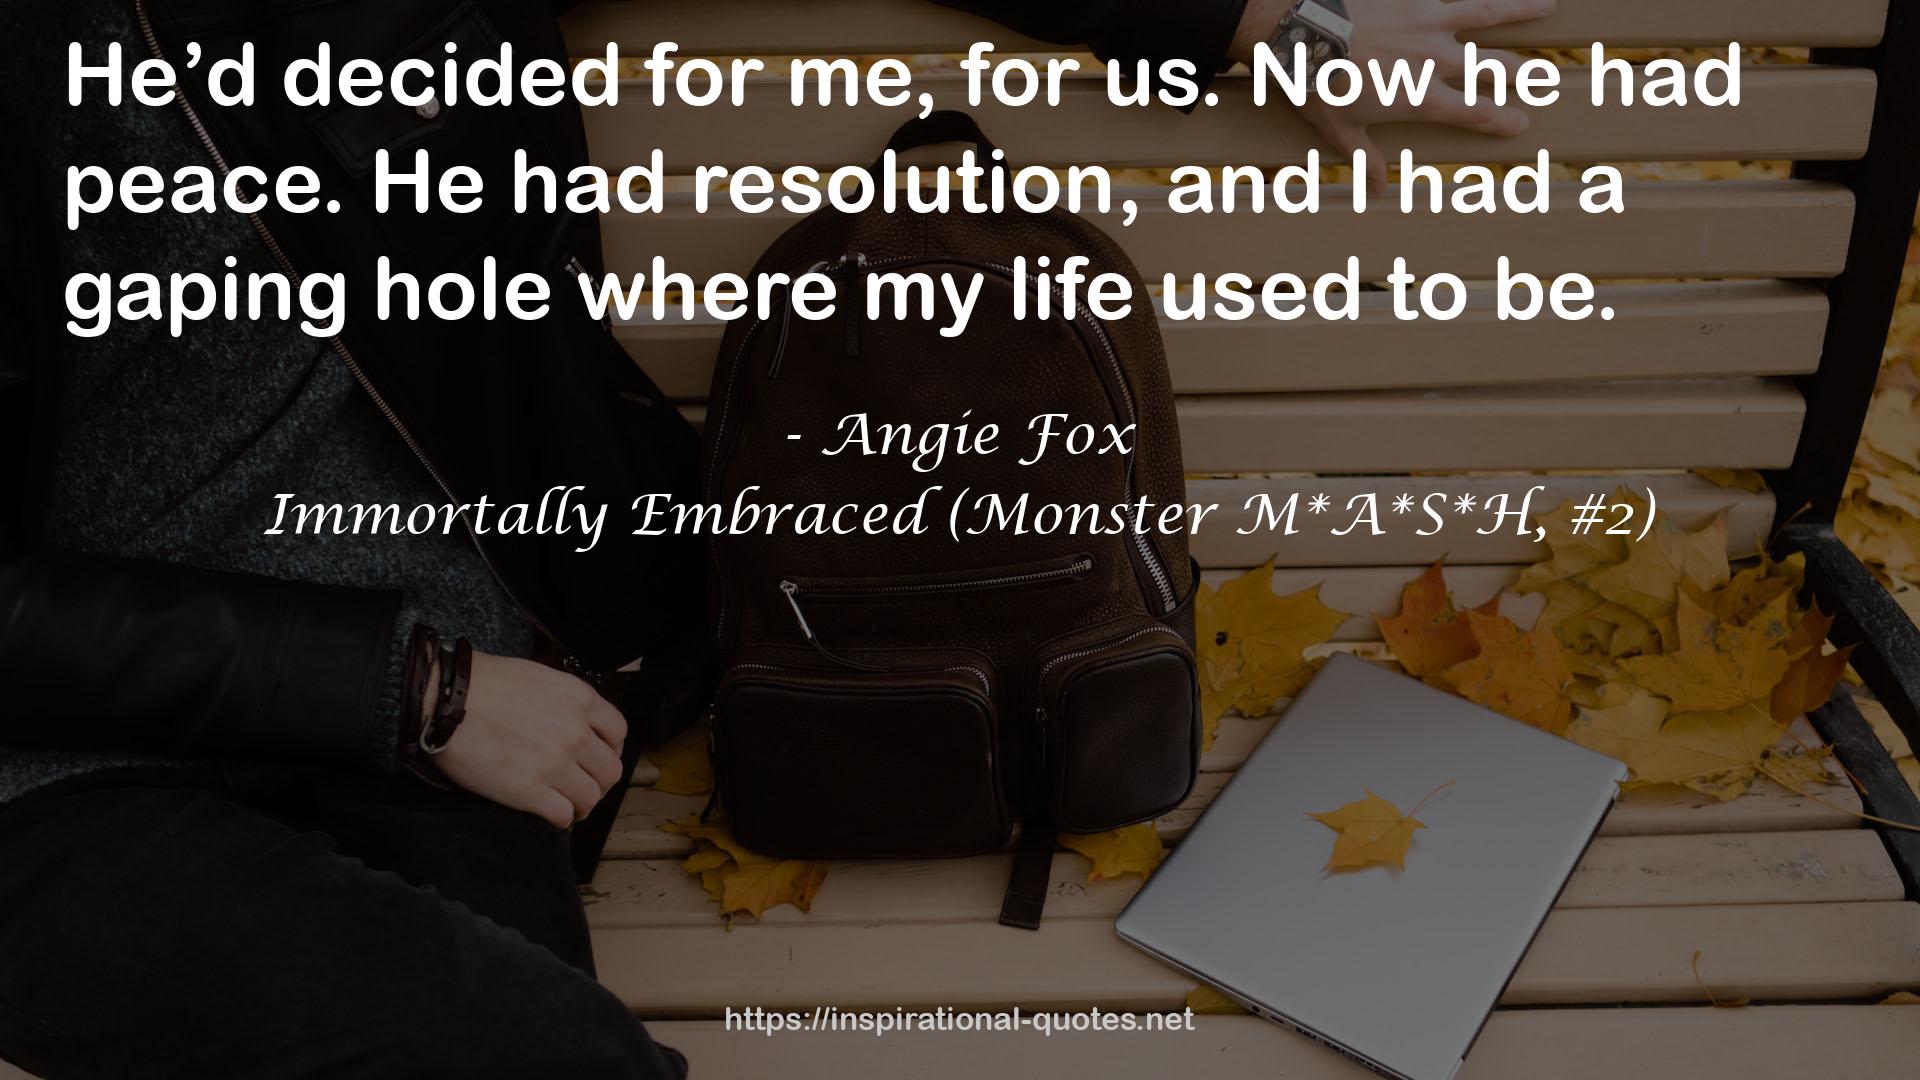 Immortally Embraced (Monster M*A*S*H, #2) QUOTES